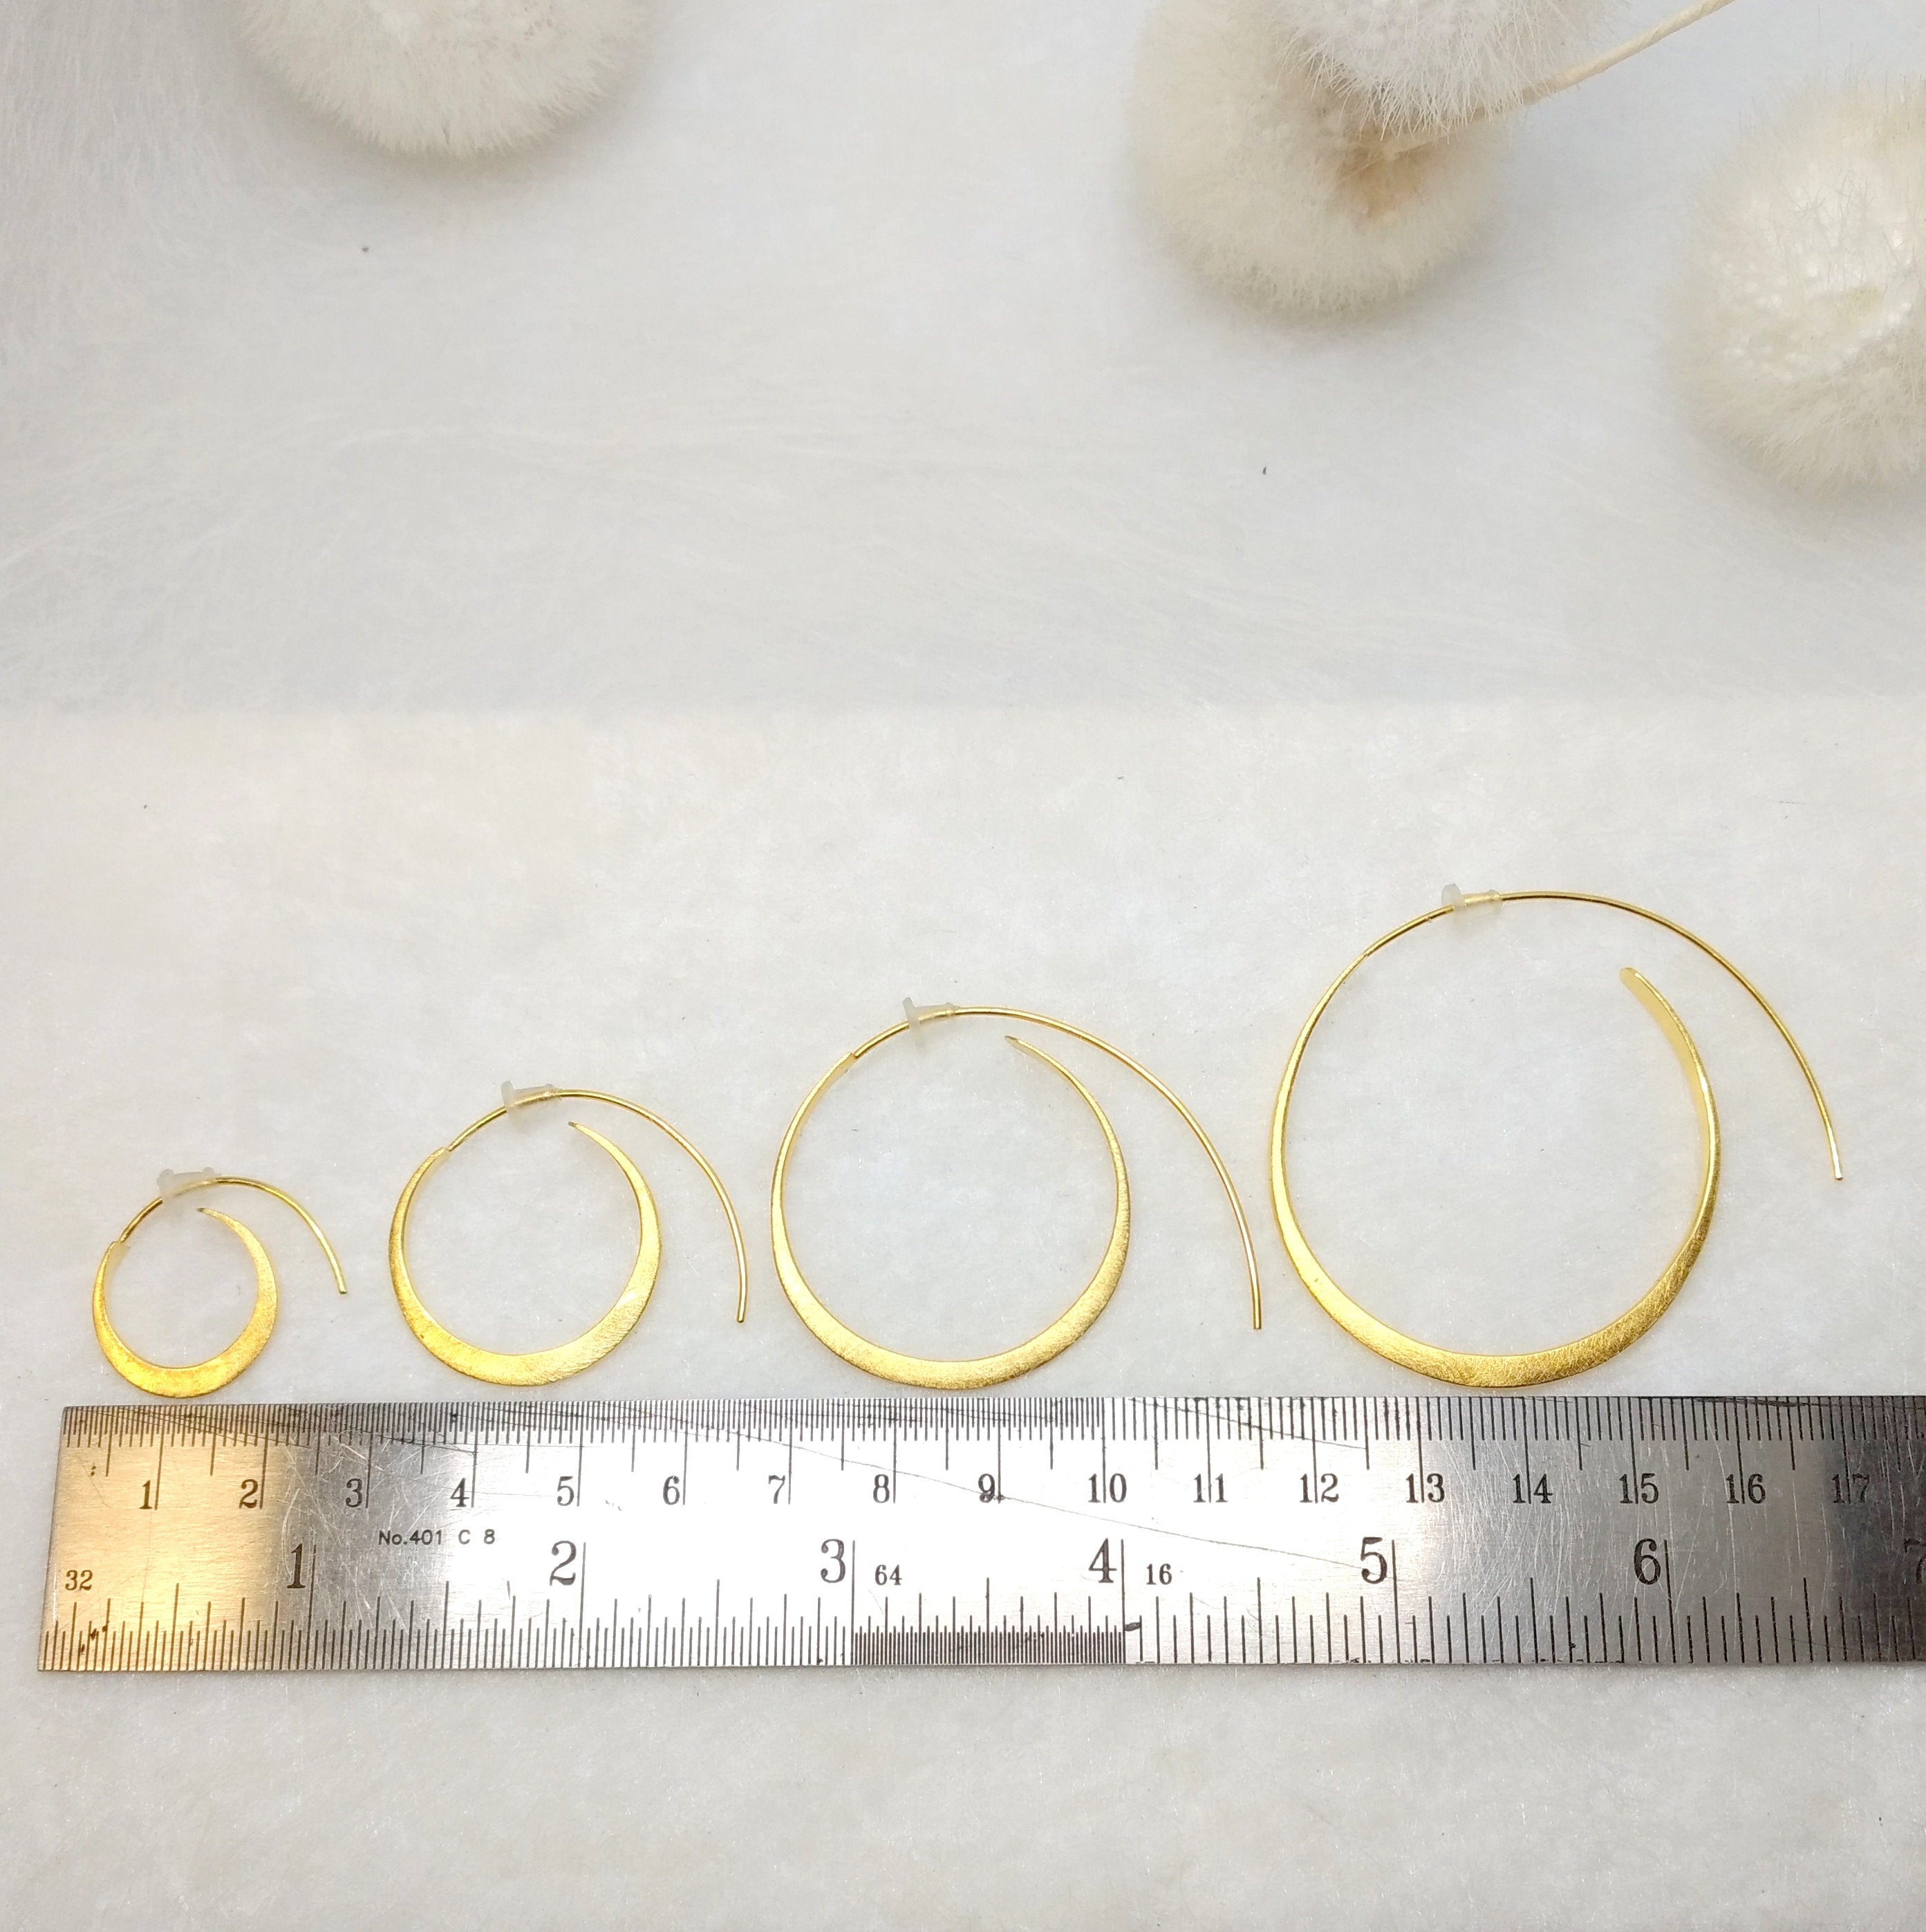 PaKti - small (ø 20mm) hoops in silver or silver gold plated